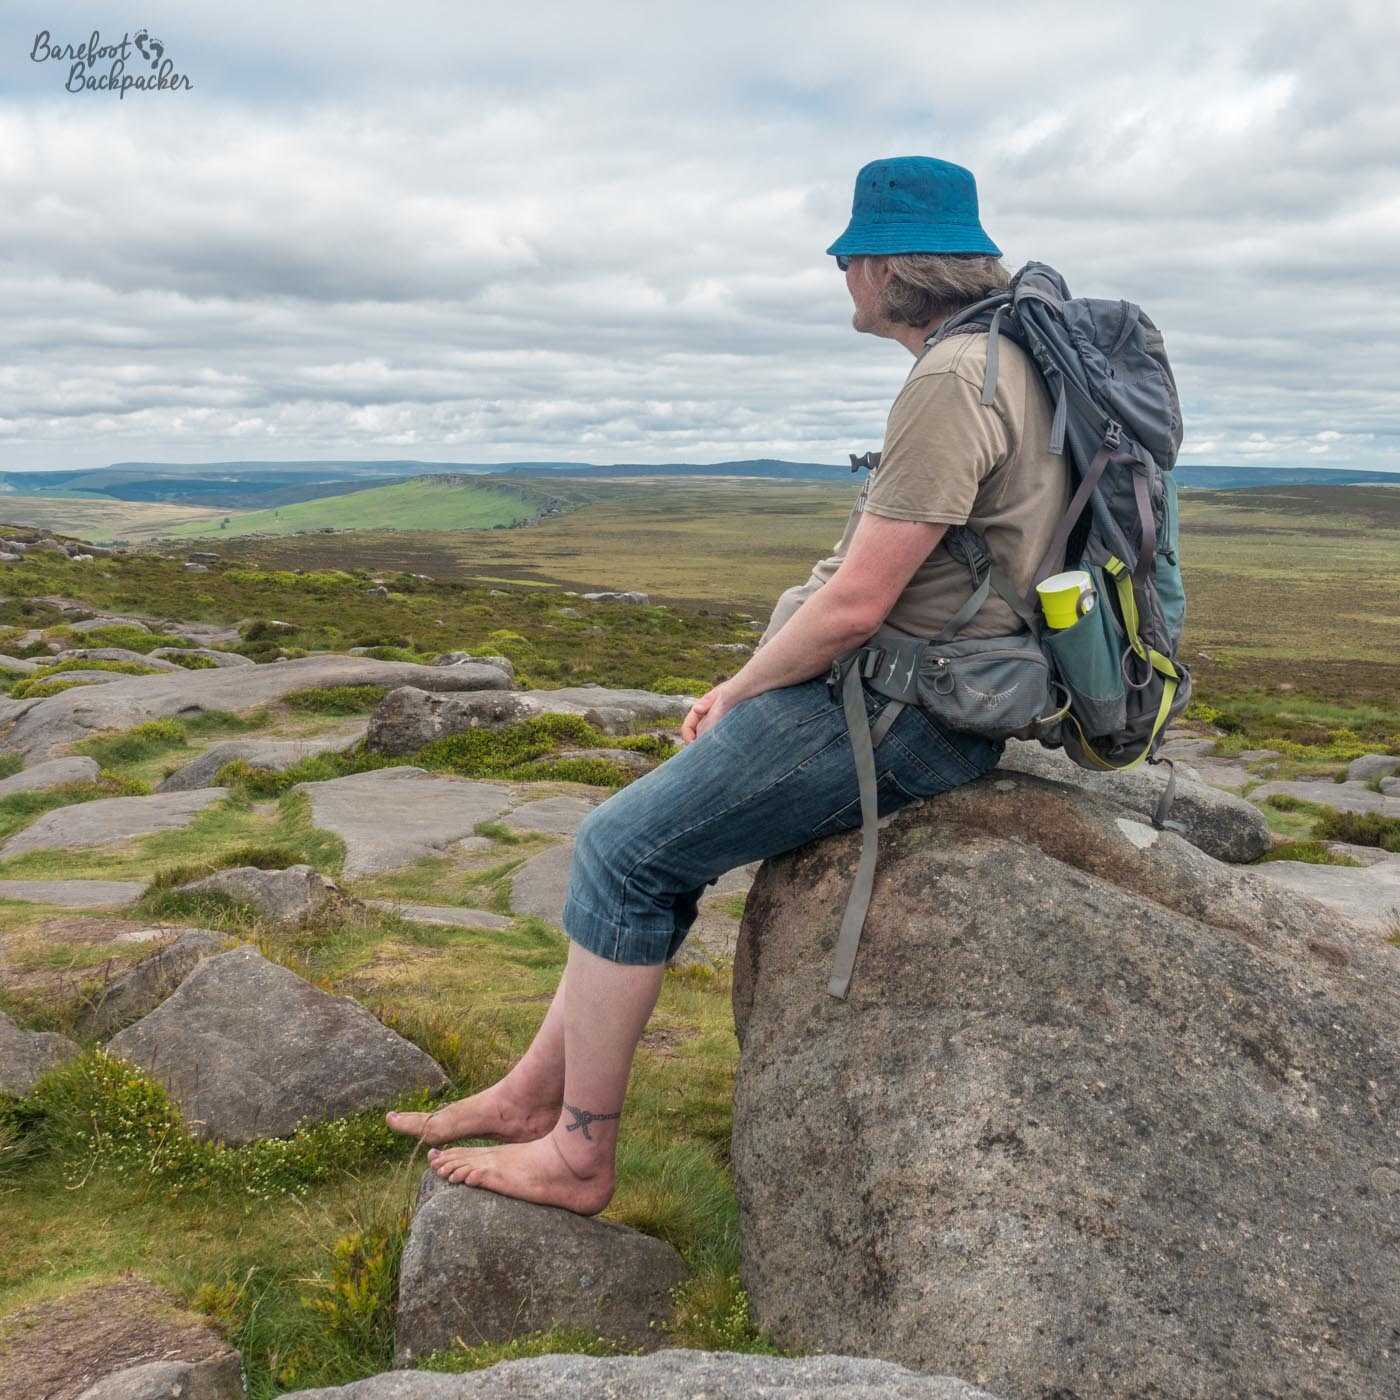 The Barefoot Backpacker sits on a rock in a field of rocks and boulders, staring out over the cliff edge at Stanage Edge in the Peak District. They're barefoot, wearing a hat, t-shirt, and denim shorts that cover the knee, and they're carrying a backpack. In the distance are mossy rounded hills, and the curved edge of the ridge can be seen disappearing into the distance.